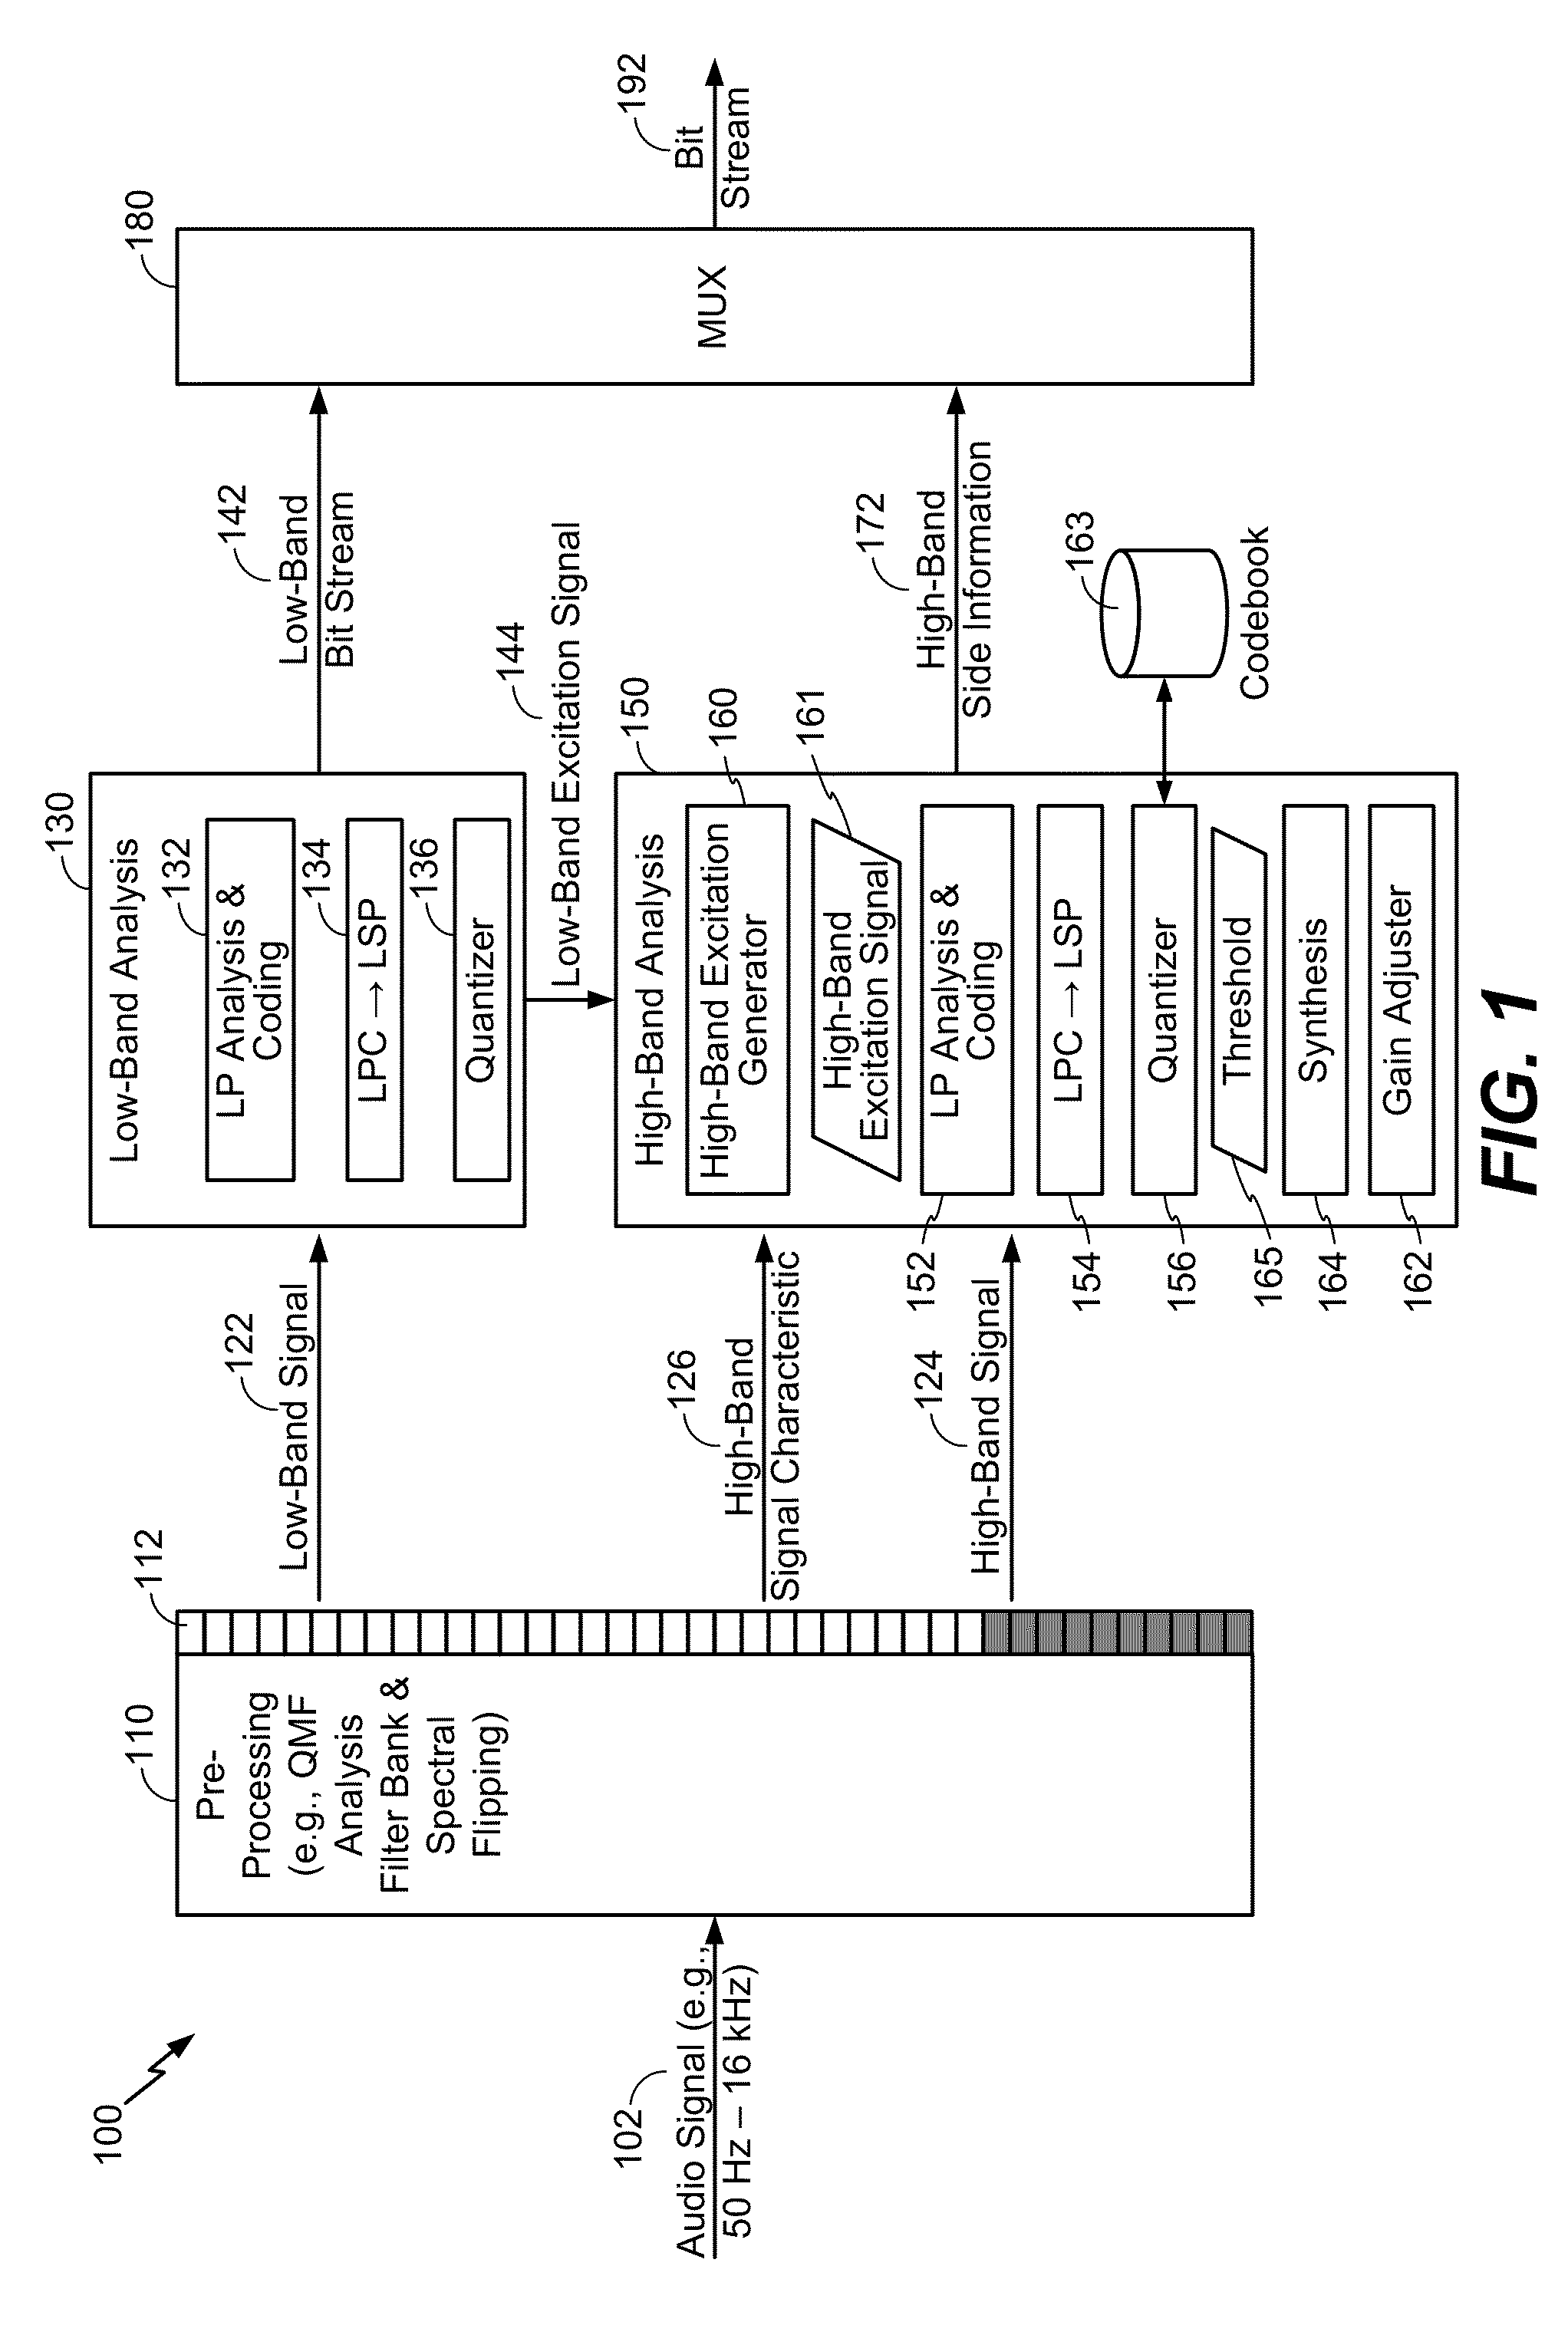 Temporal gain adjustment based on high-band signal characteristic